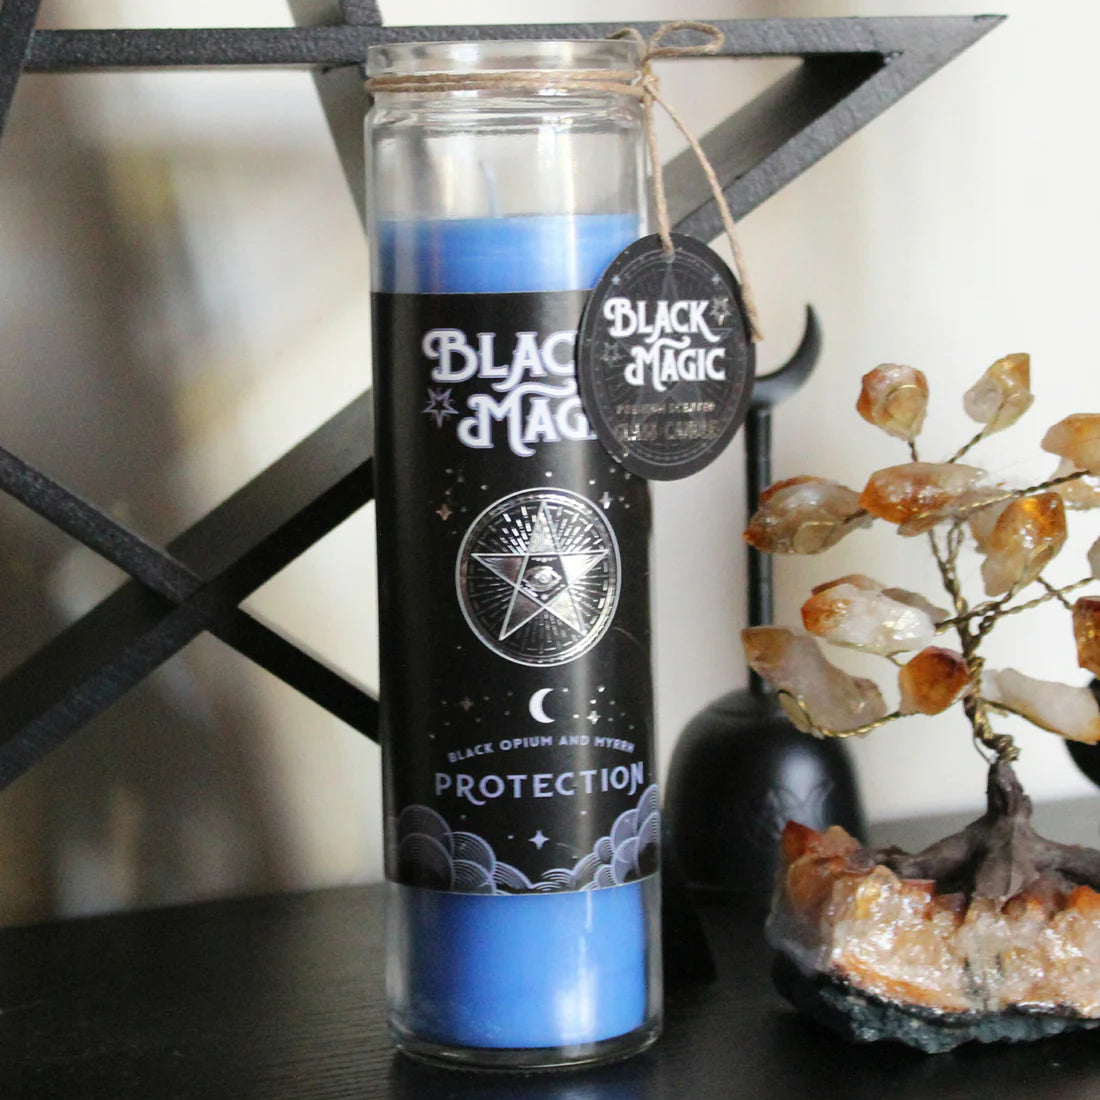 Black Magic Spell Candle